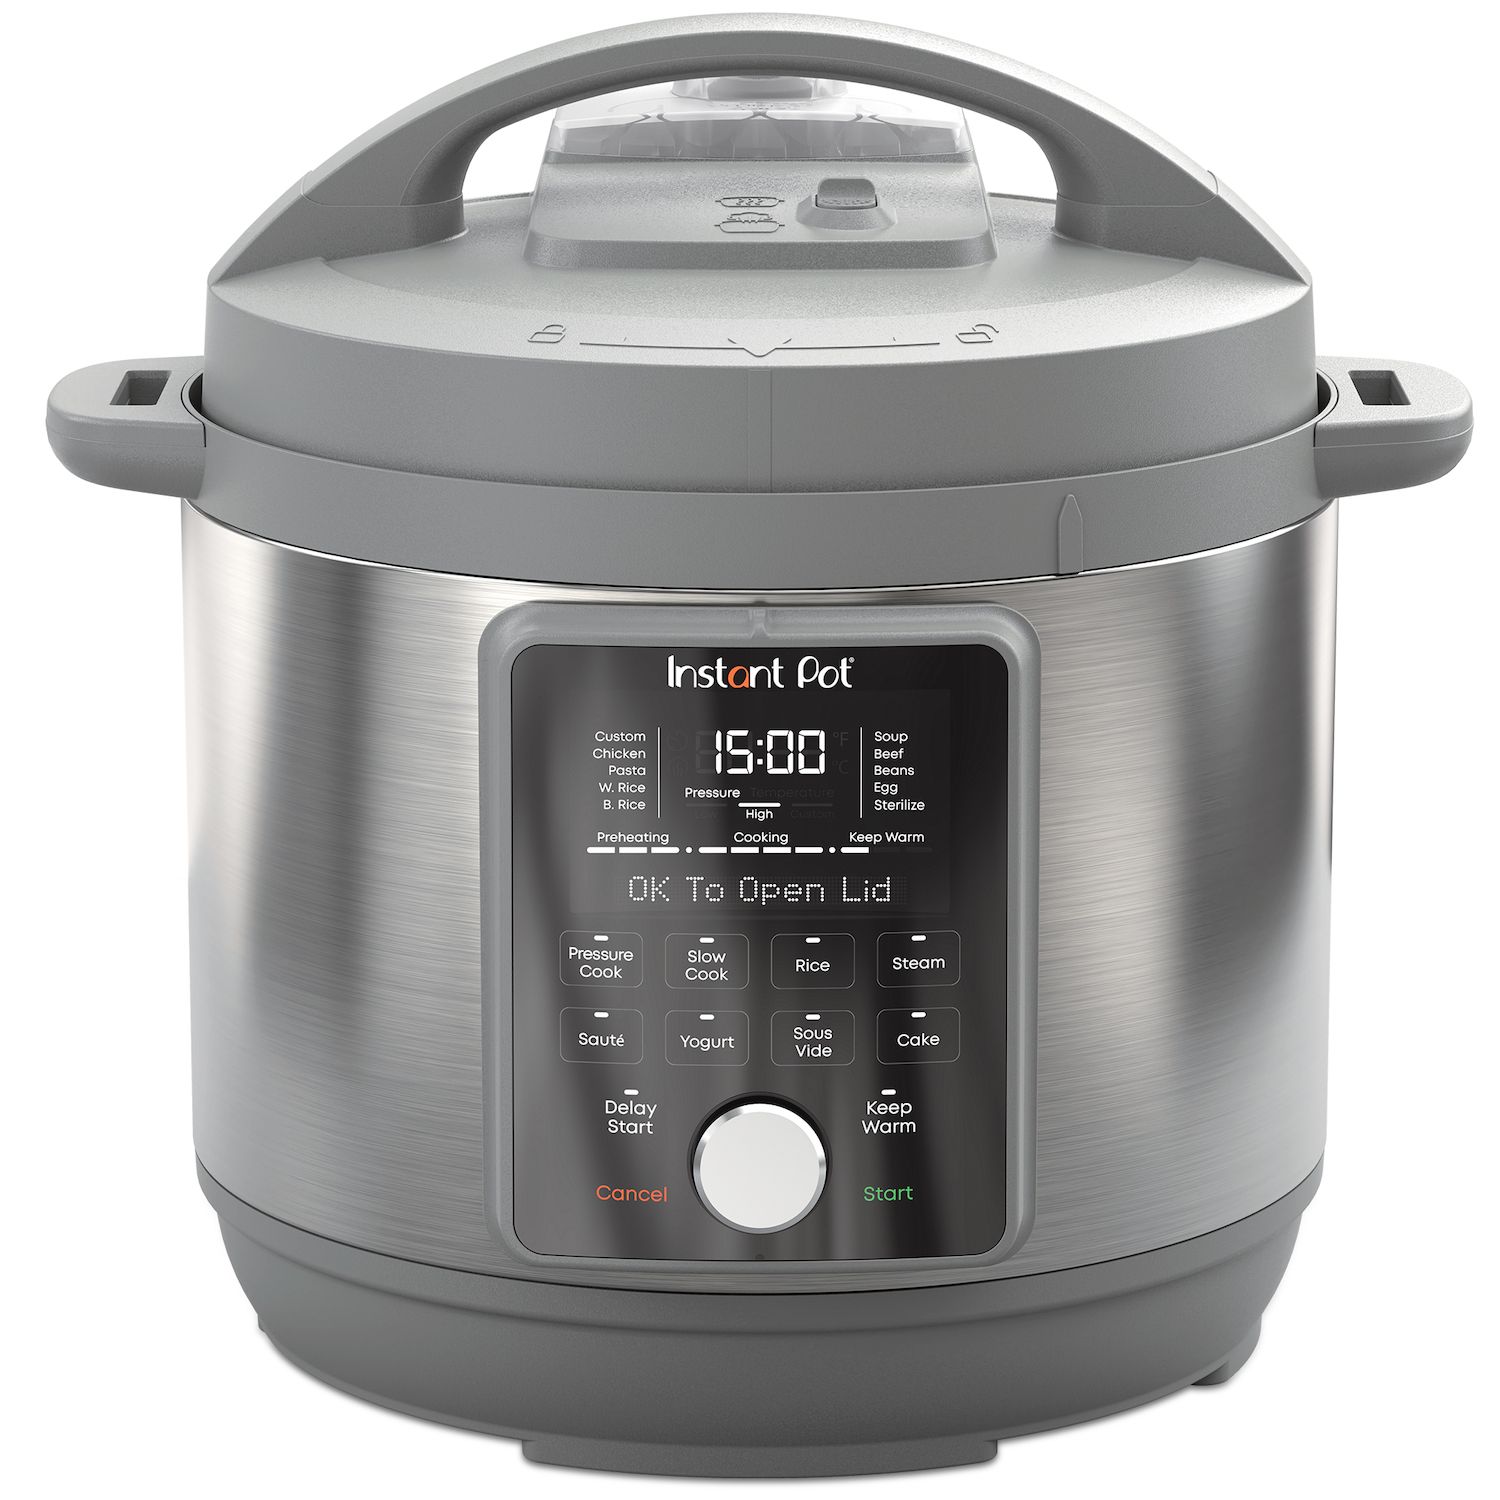 Zavor DUO 8.4 Quart Multi-Setting Pressure Cooker and Canner with